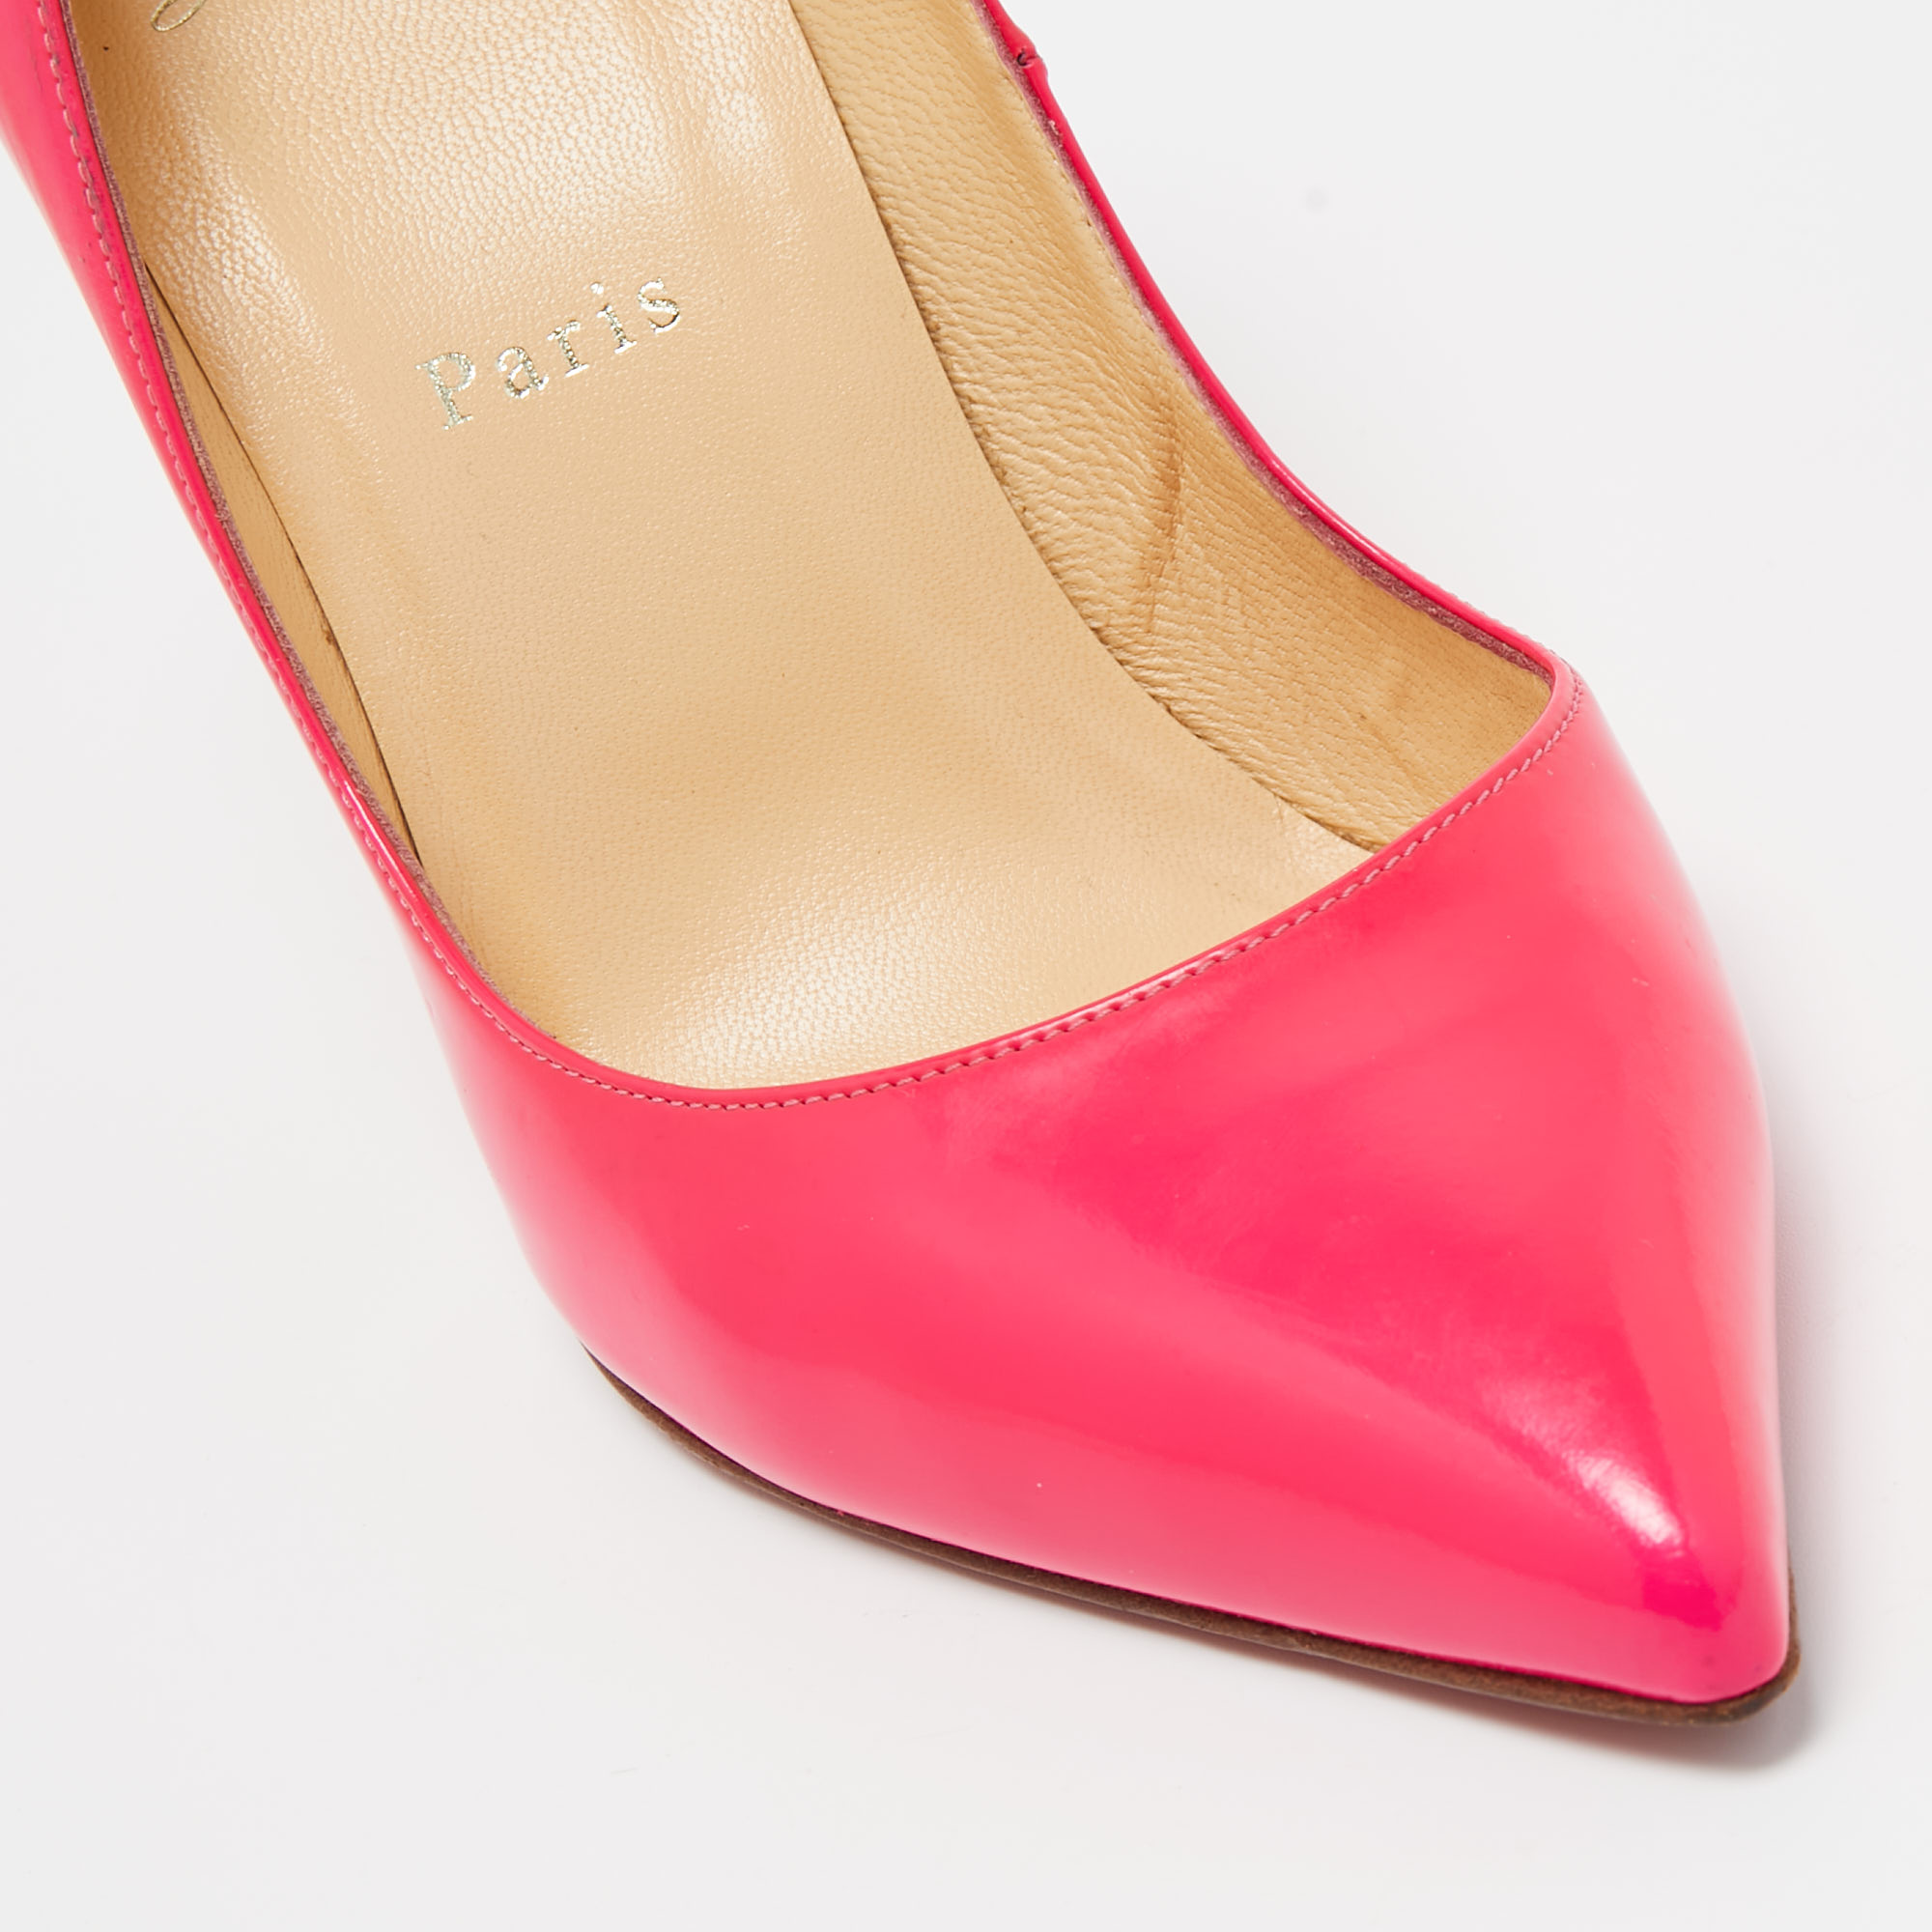 Christian Louboutin Pink Leather So Kate Pointed Toe Pumps Size 38.5